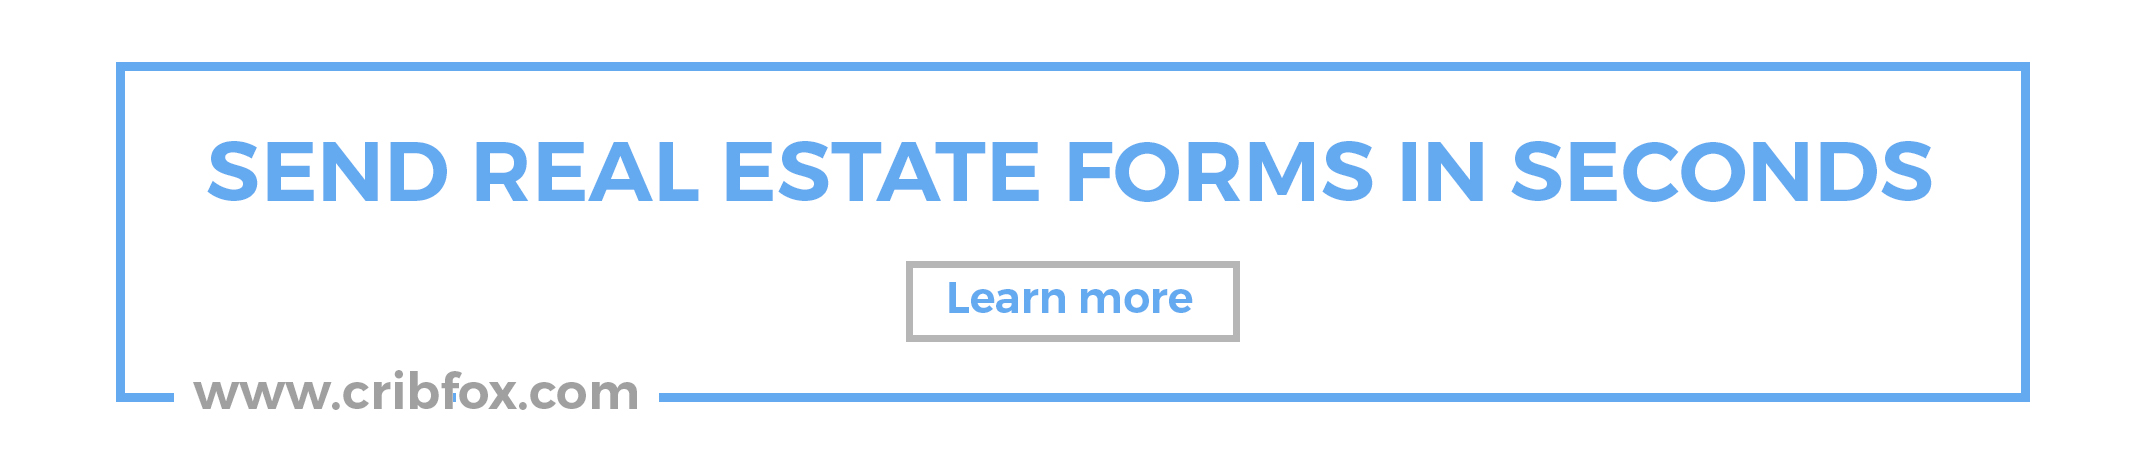 Send Real Estate Forms in Seconds. Cribfox banner ad, horizontal.